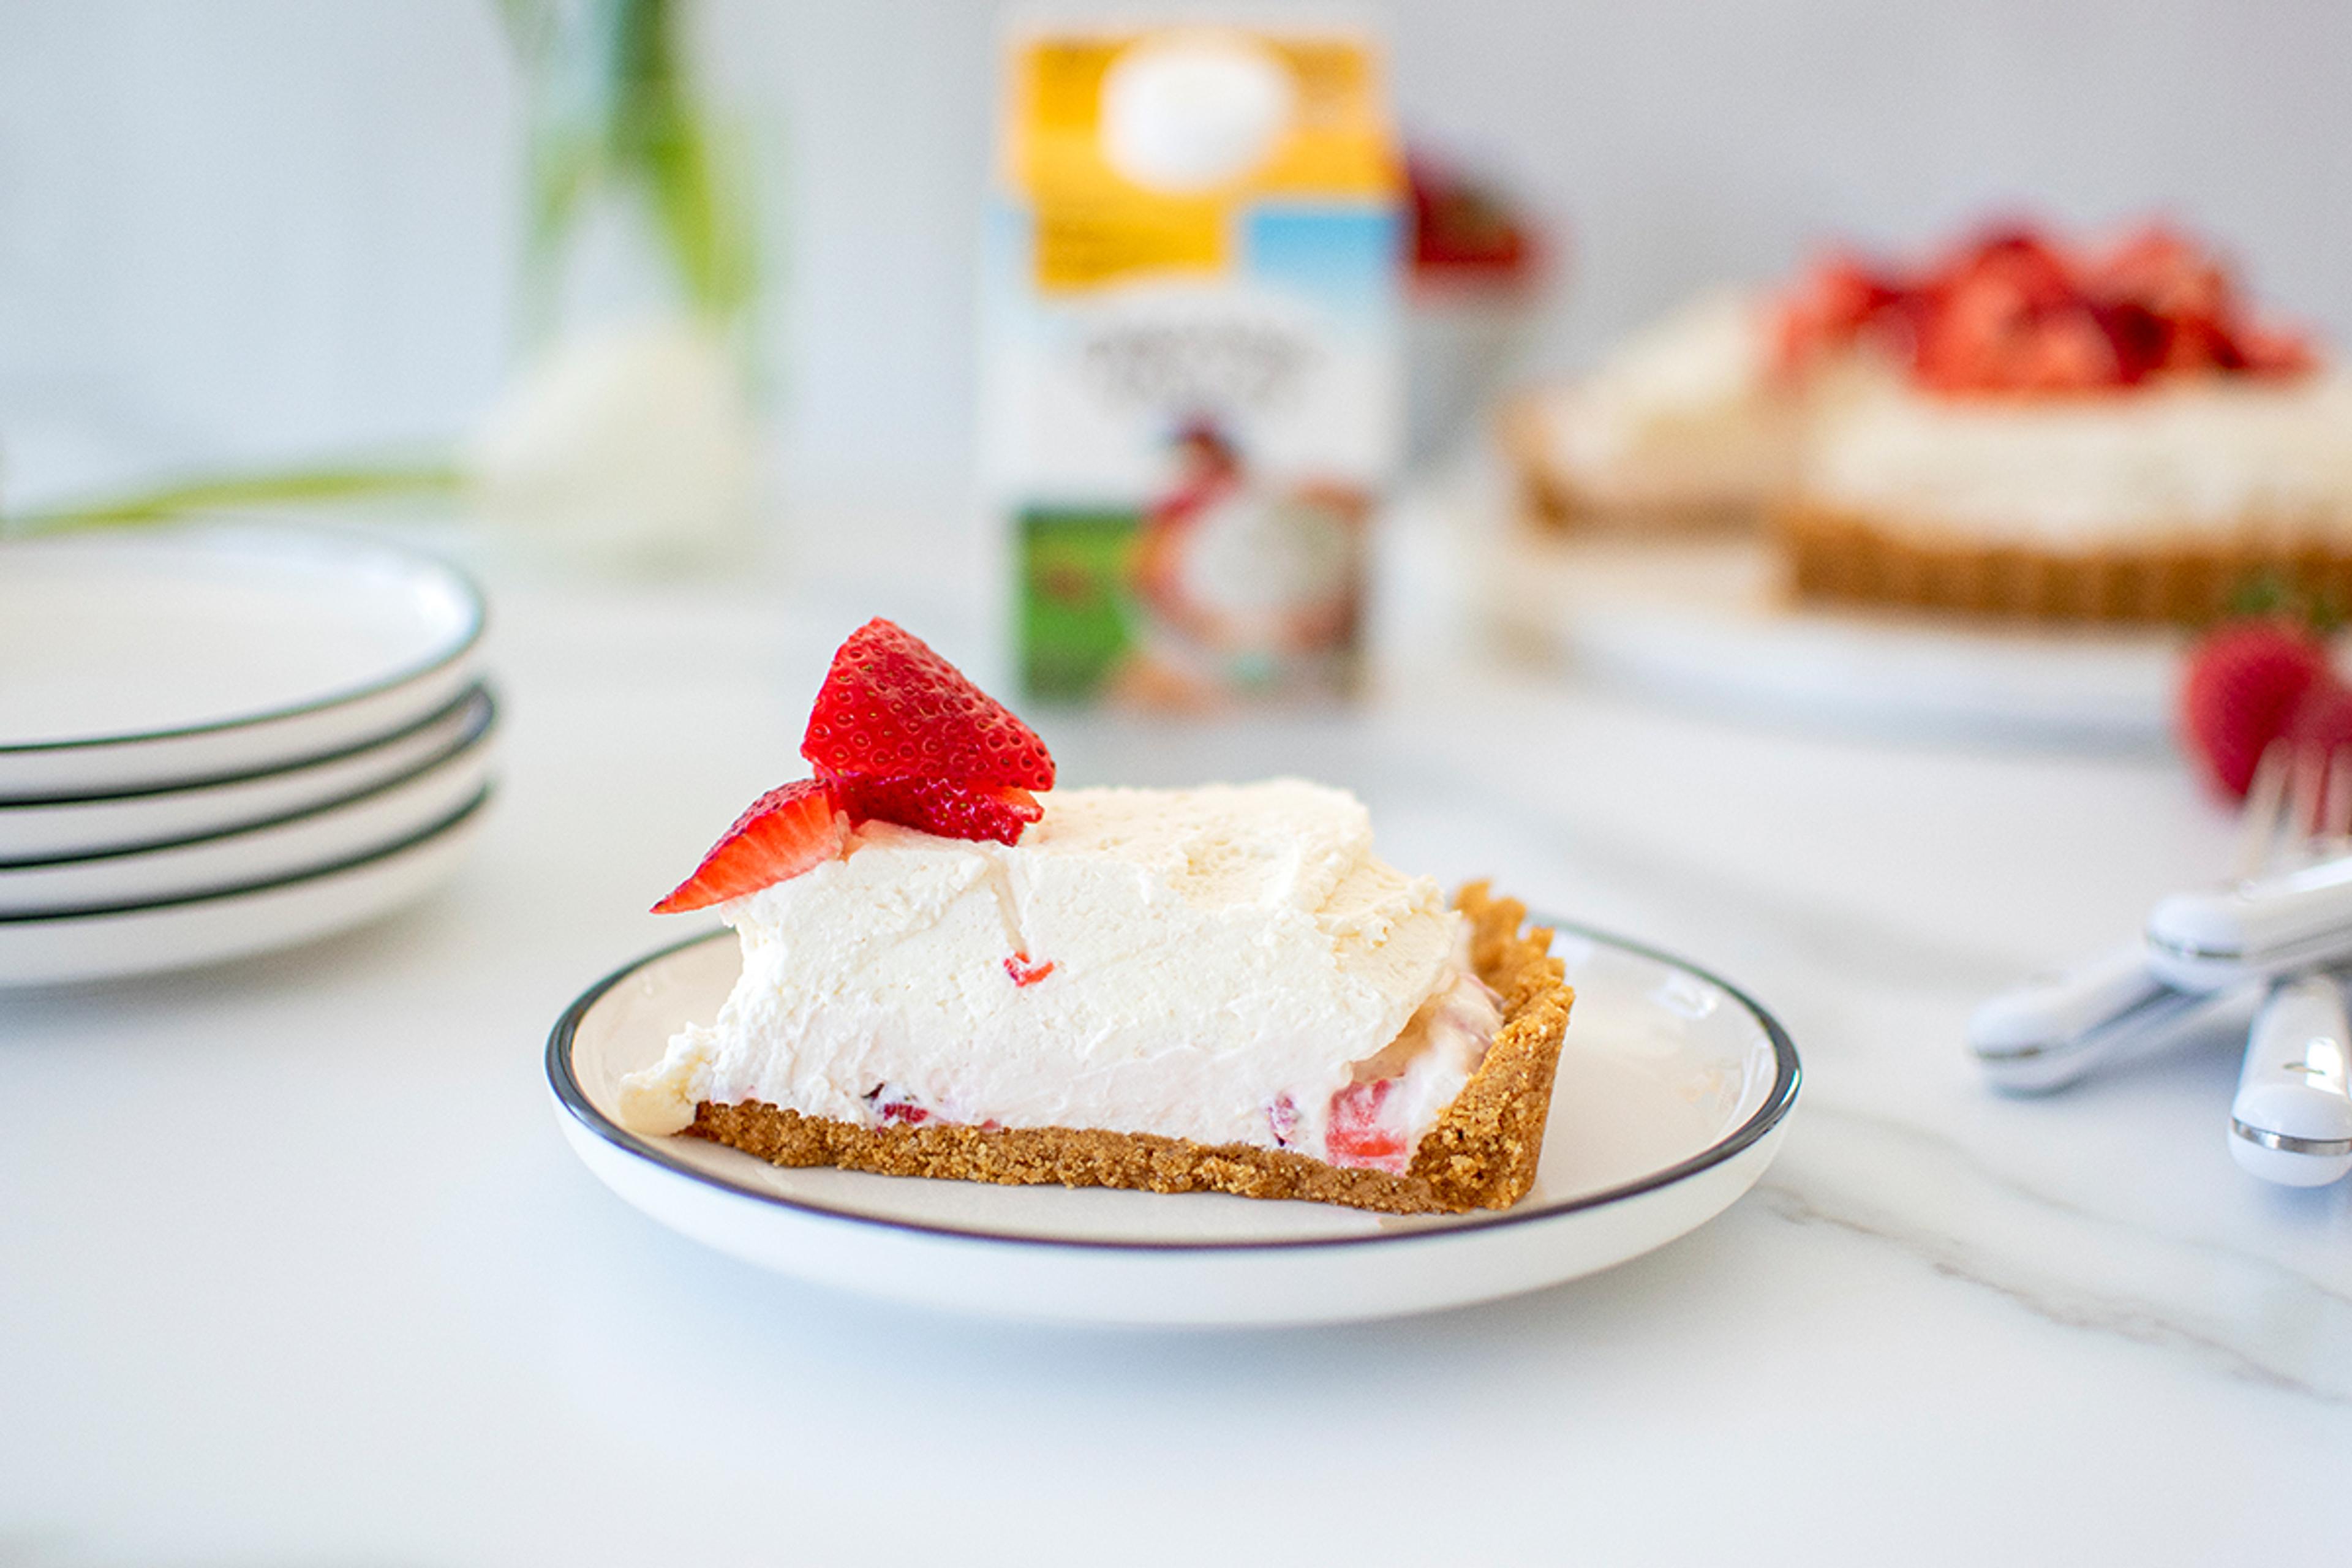 Slice of pie topped with homemade whipped cream.